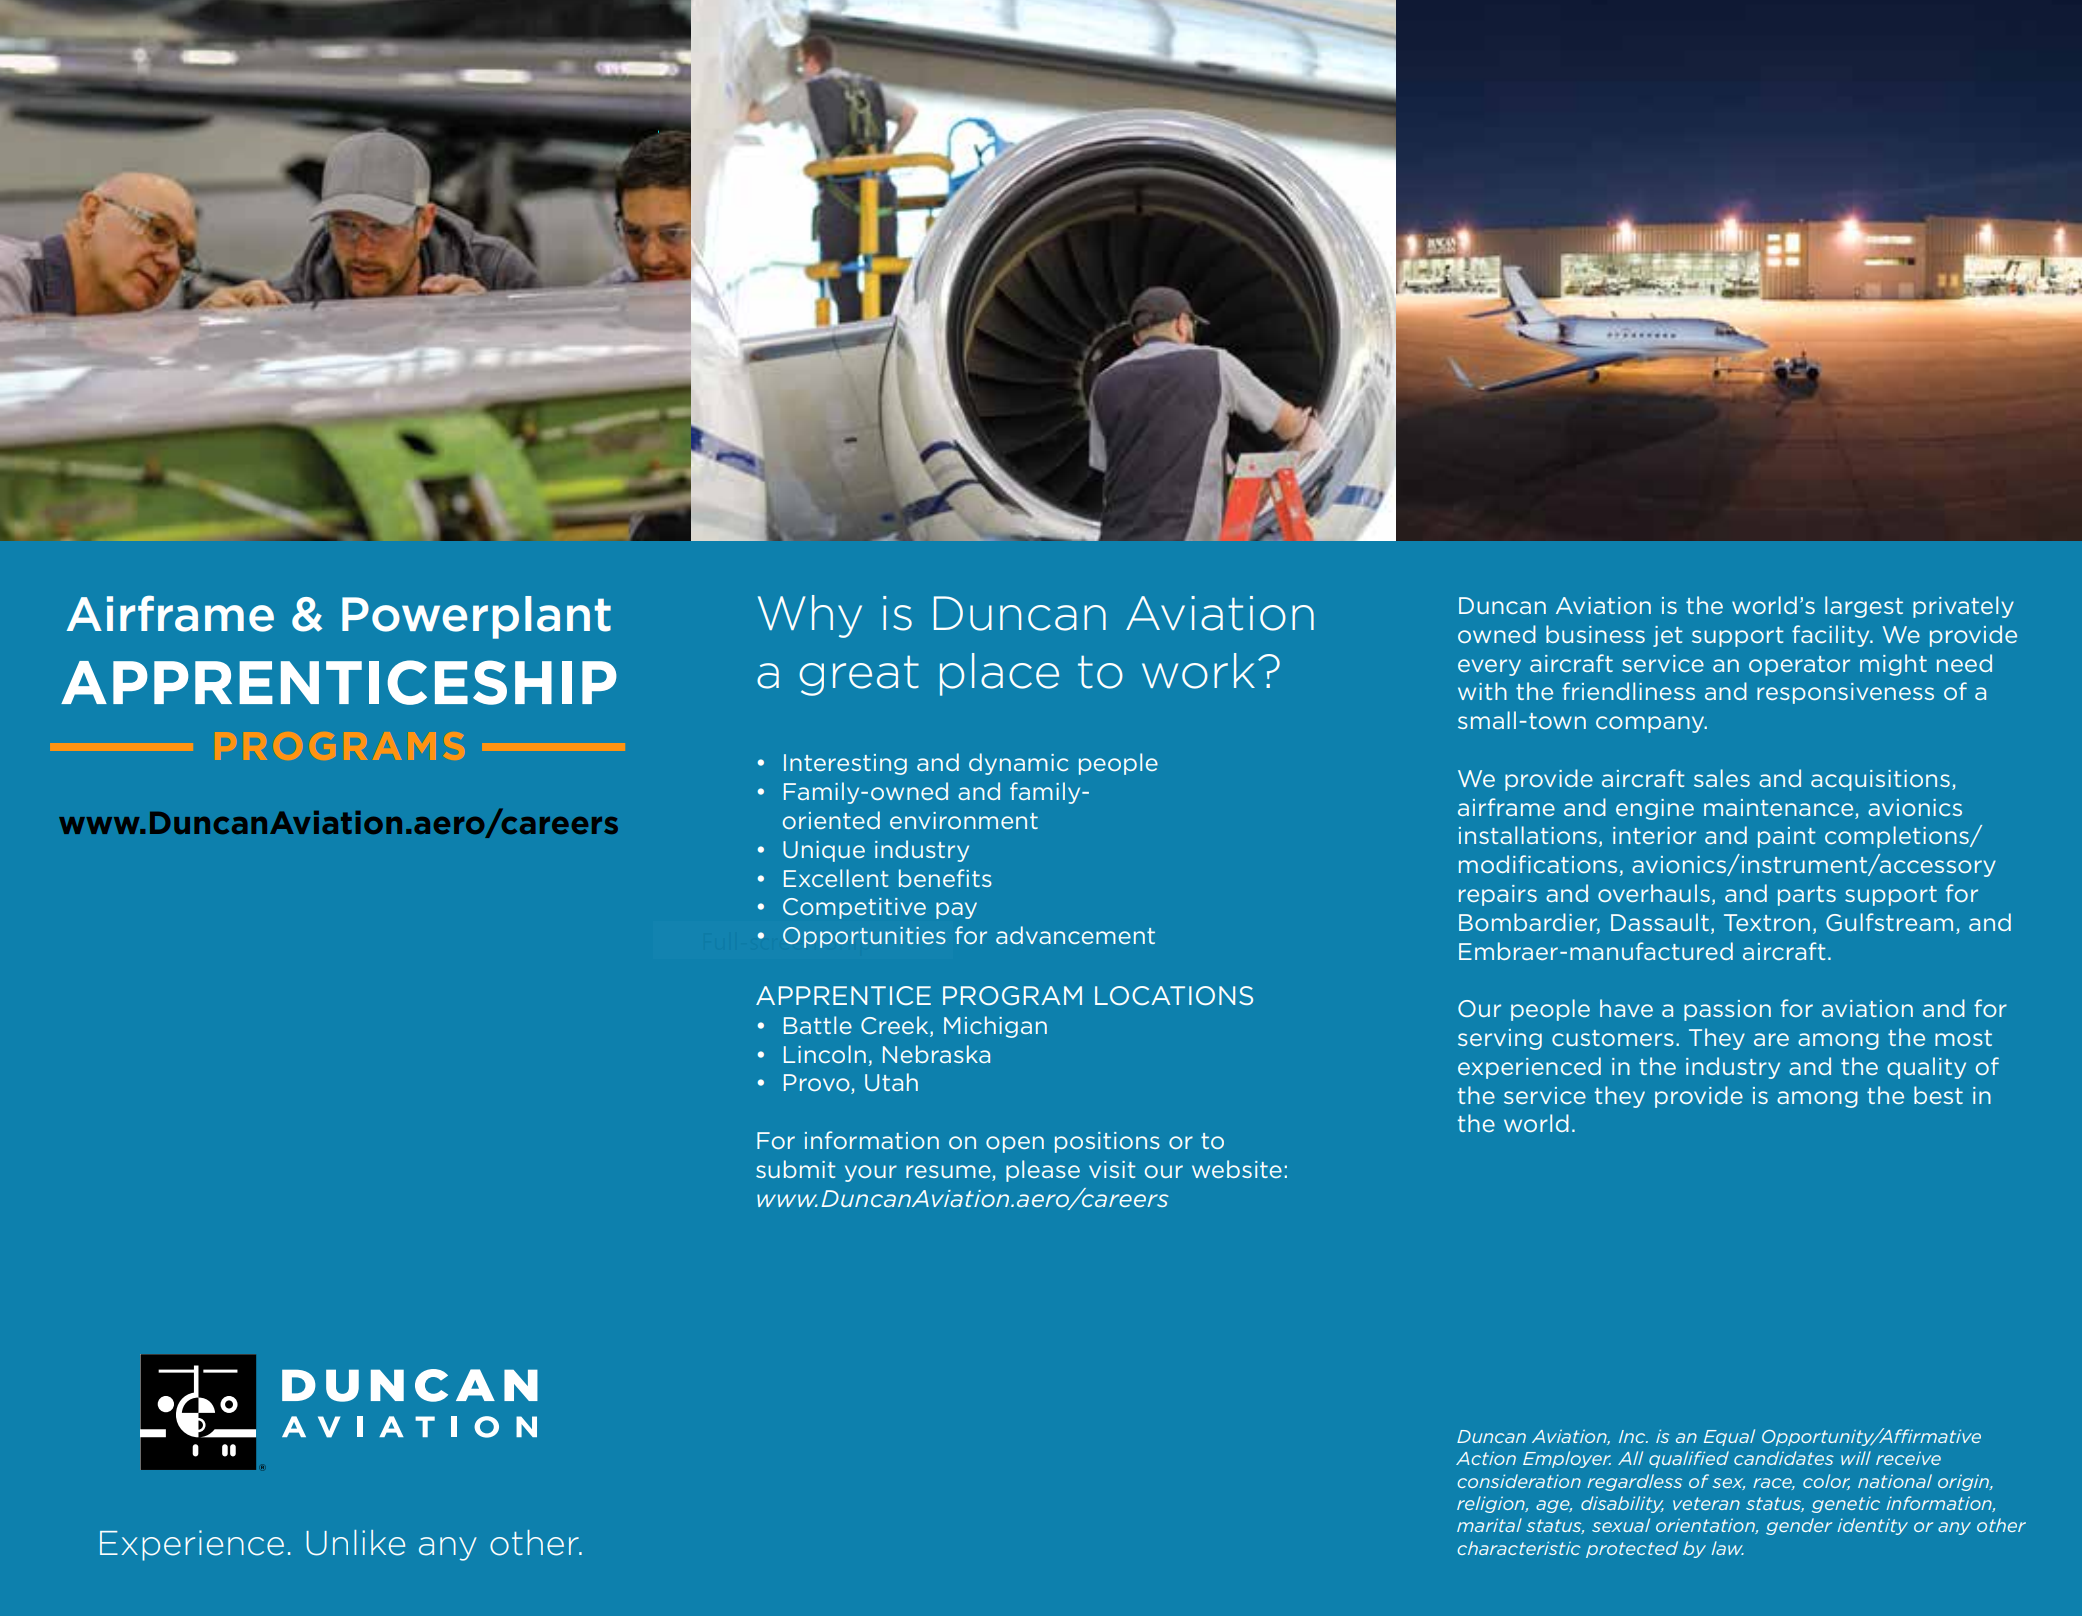 How to Find an Apprenticeship in the U.S. Duncan Aviation